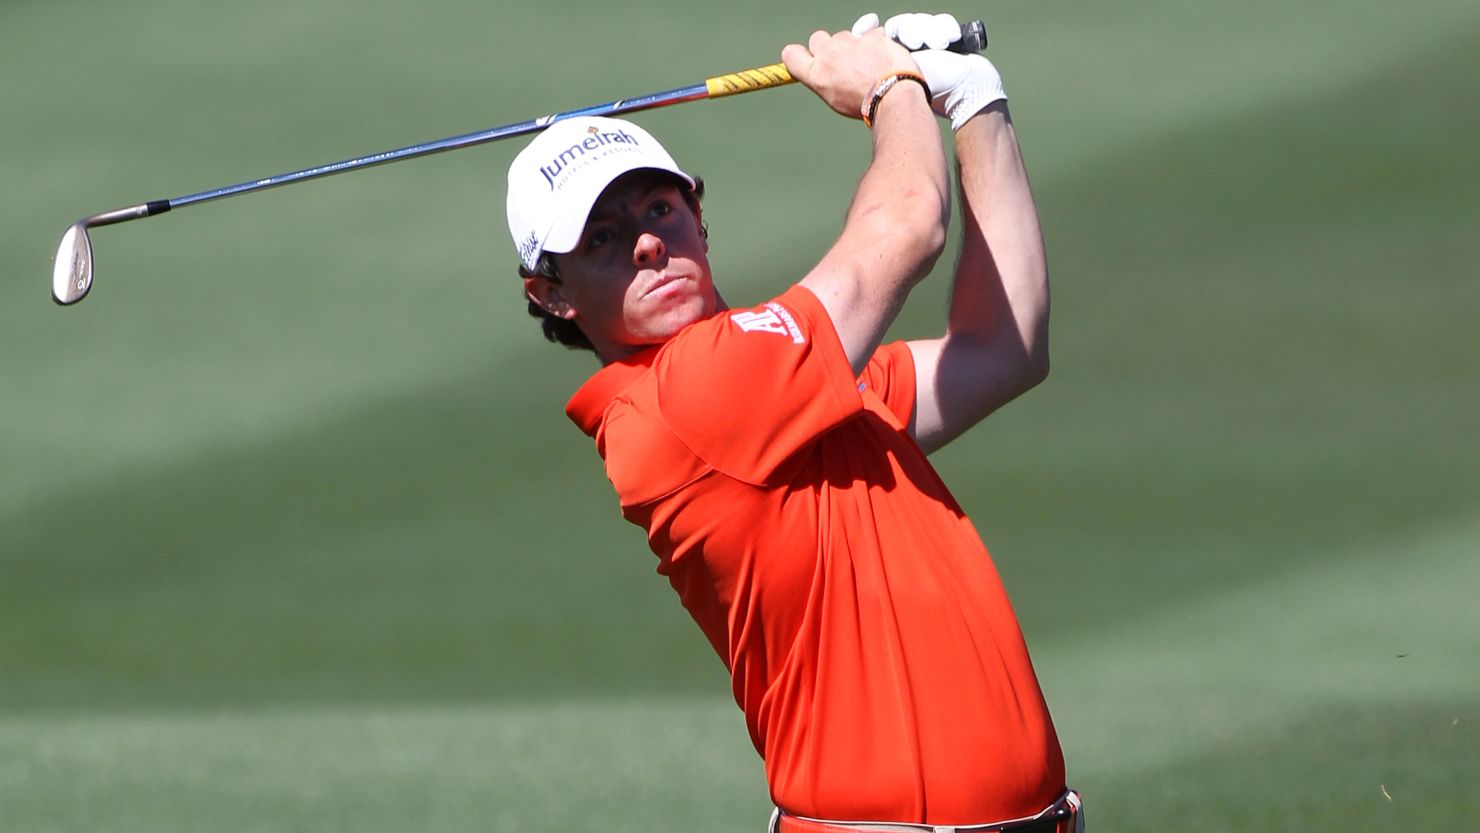 Northern Ireland golf star Rory McIlroy beat South Korea's Bae Sang-moon in his quarterfinal on Saturday.